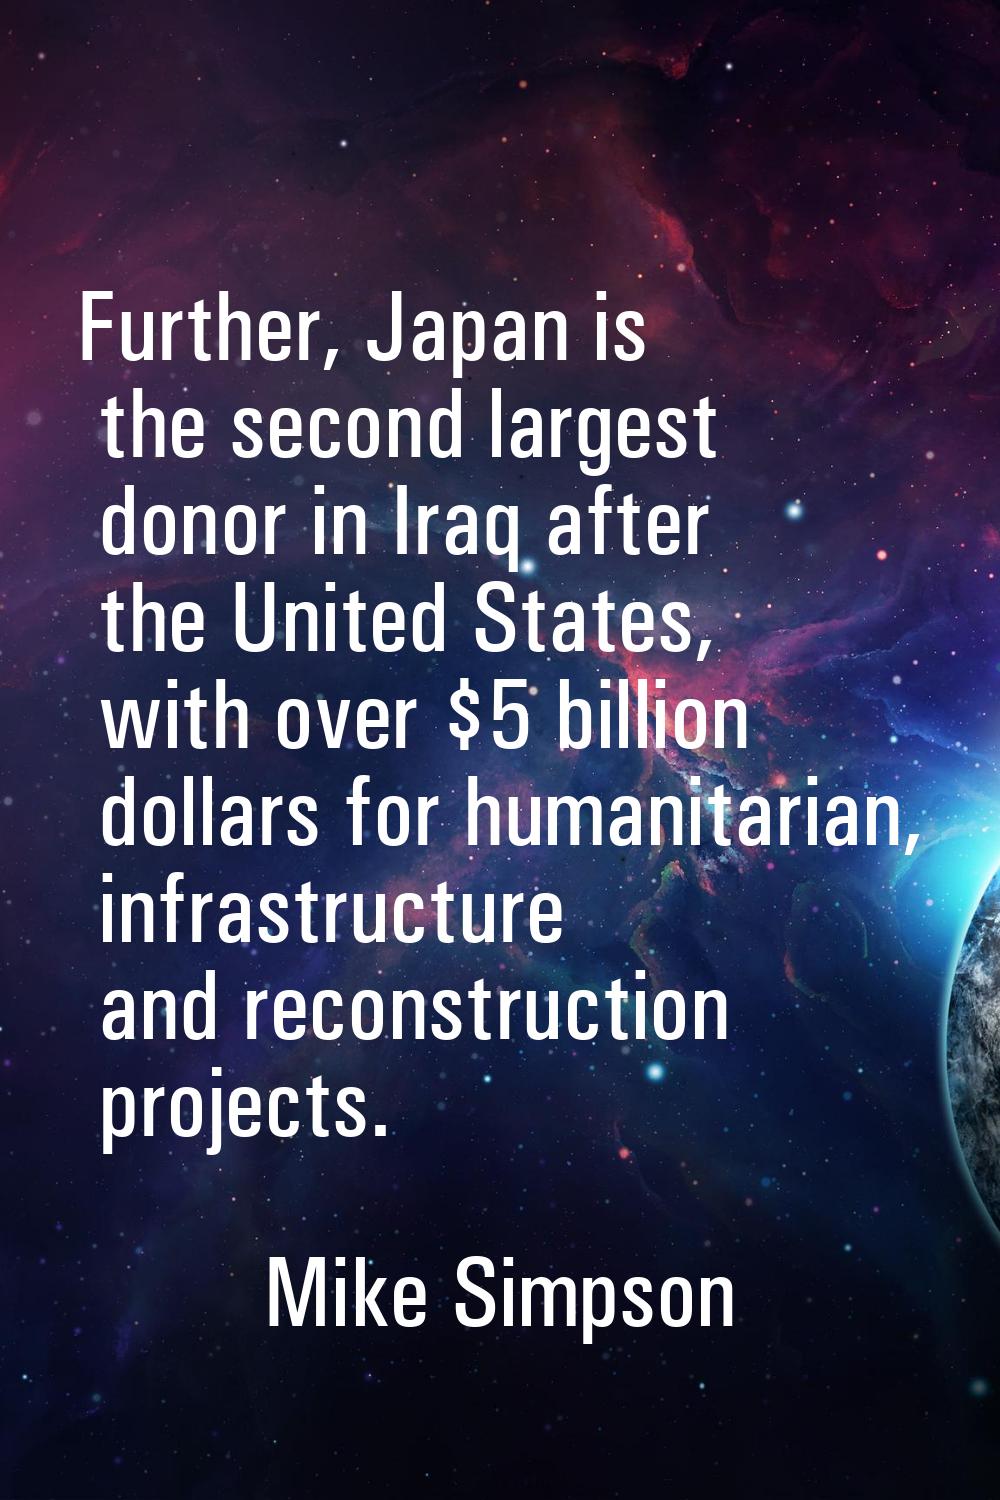 Further, Japan is the second largest donor in Iraq after the United States, with over $5 billion do